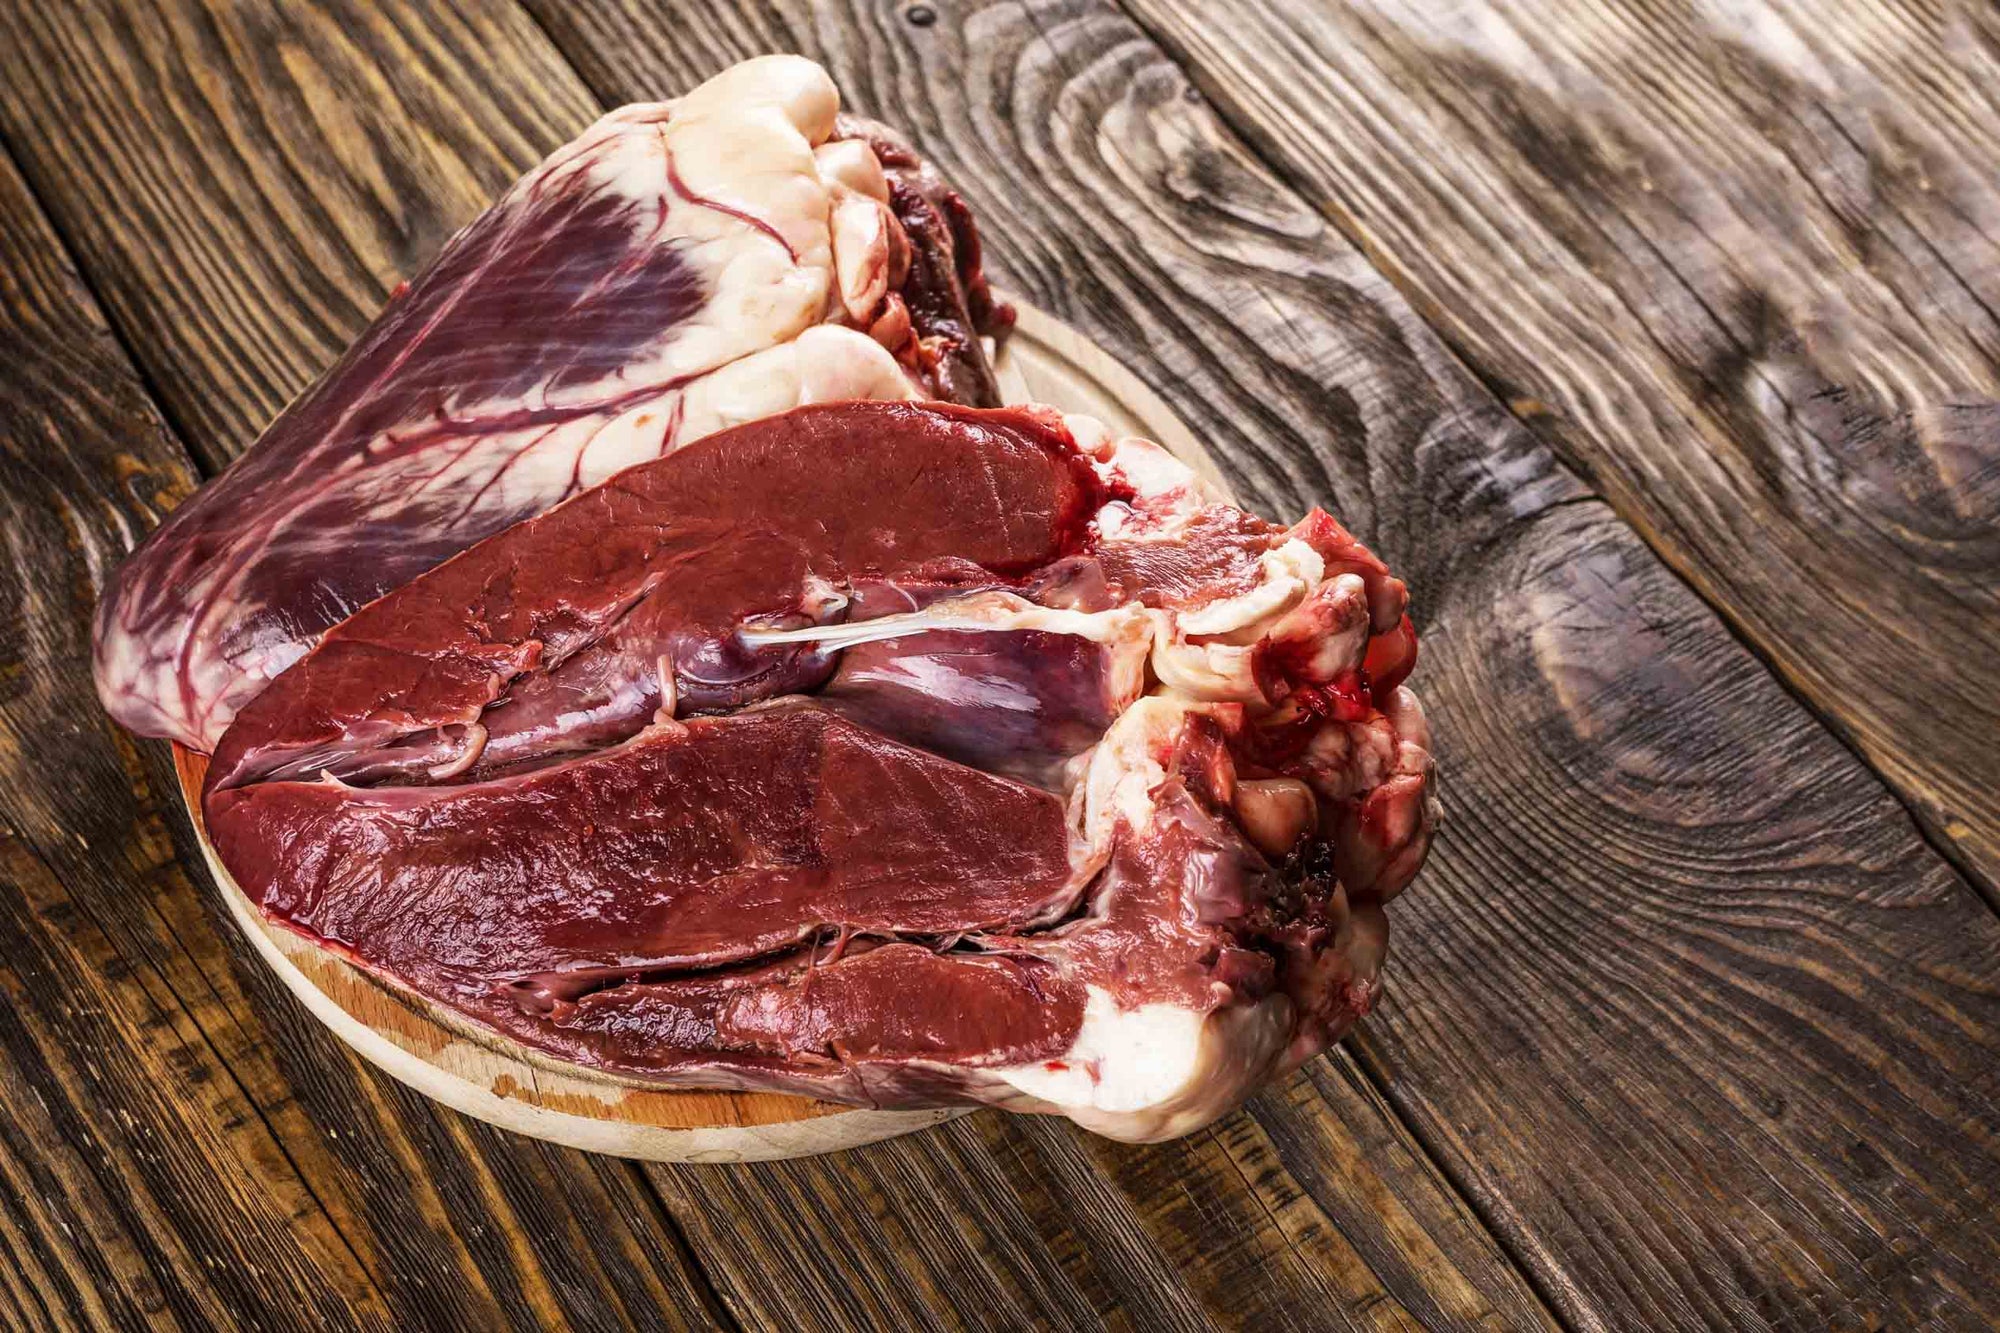 fresh bison delivery 100% grass fed and finished as nature intended amazon prime never frozen fast order buffalo next day shipping non-gmo soy free corn-free gluten-free freshest organ meat heart liver kidney spleen thymus pancreas adrenal tongue